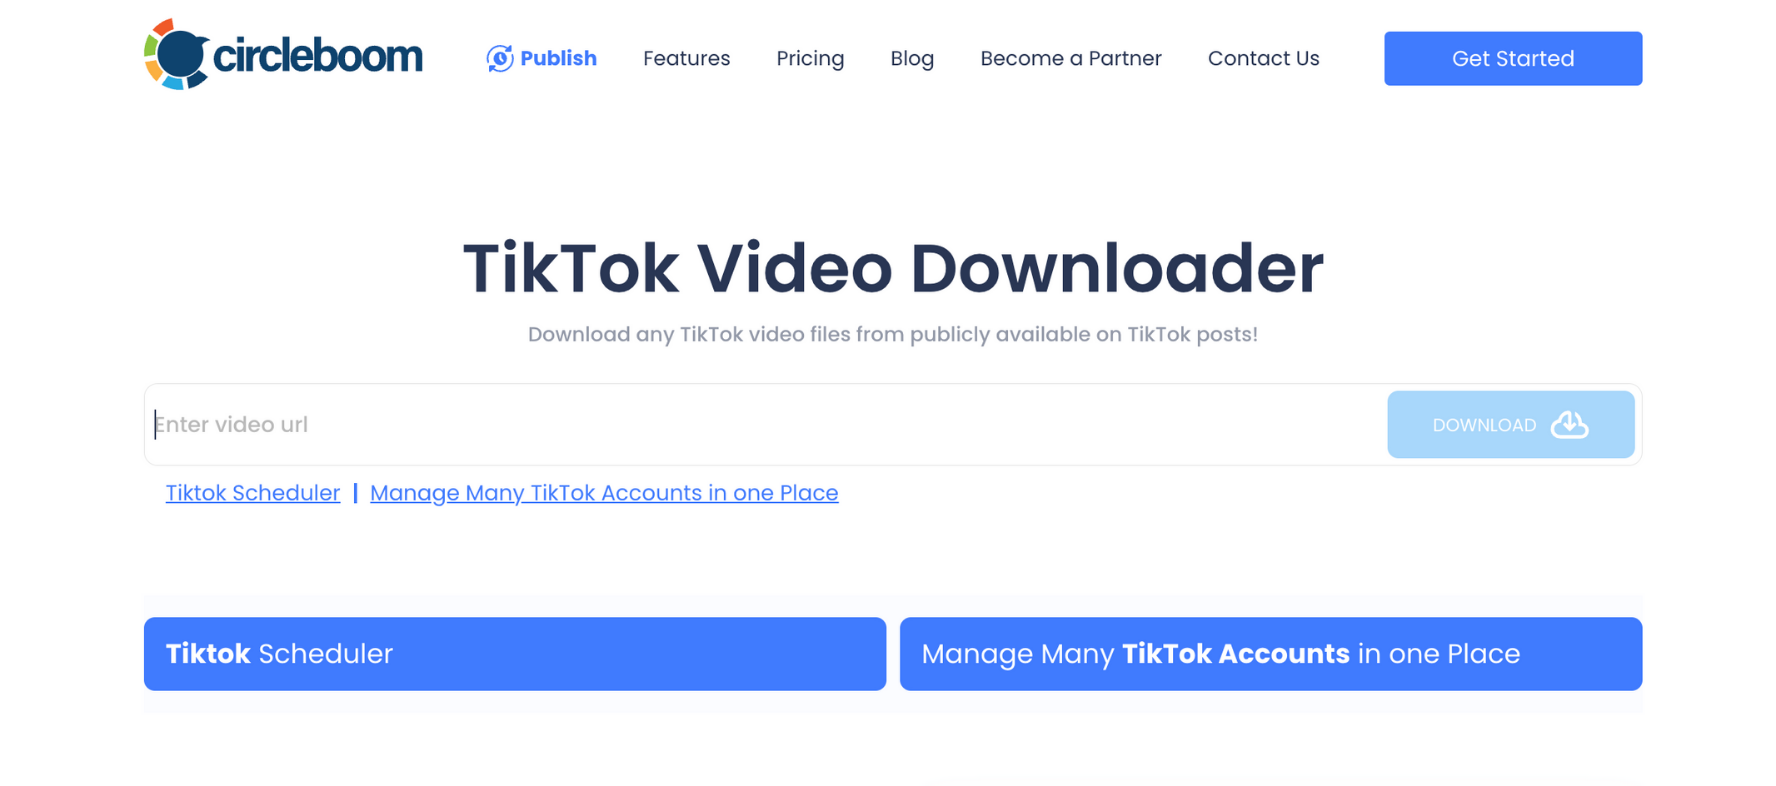 How can I share a TikTok video on Instagram?